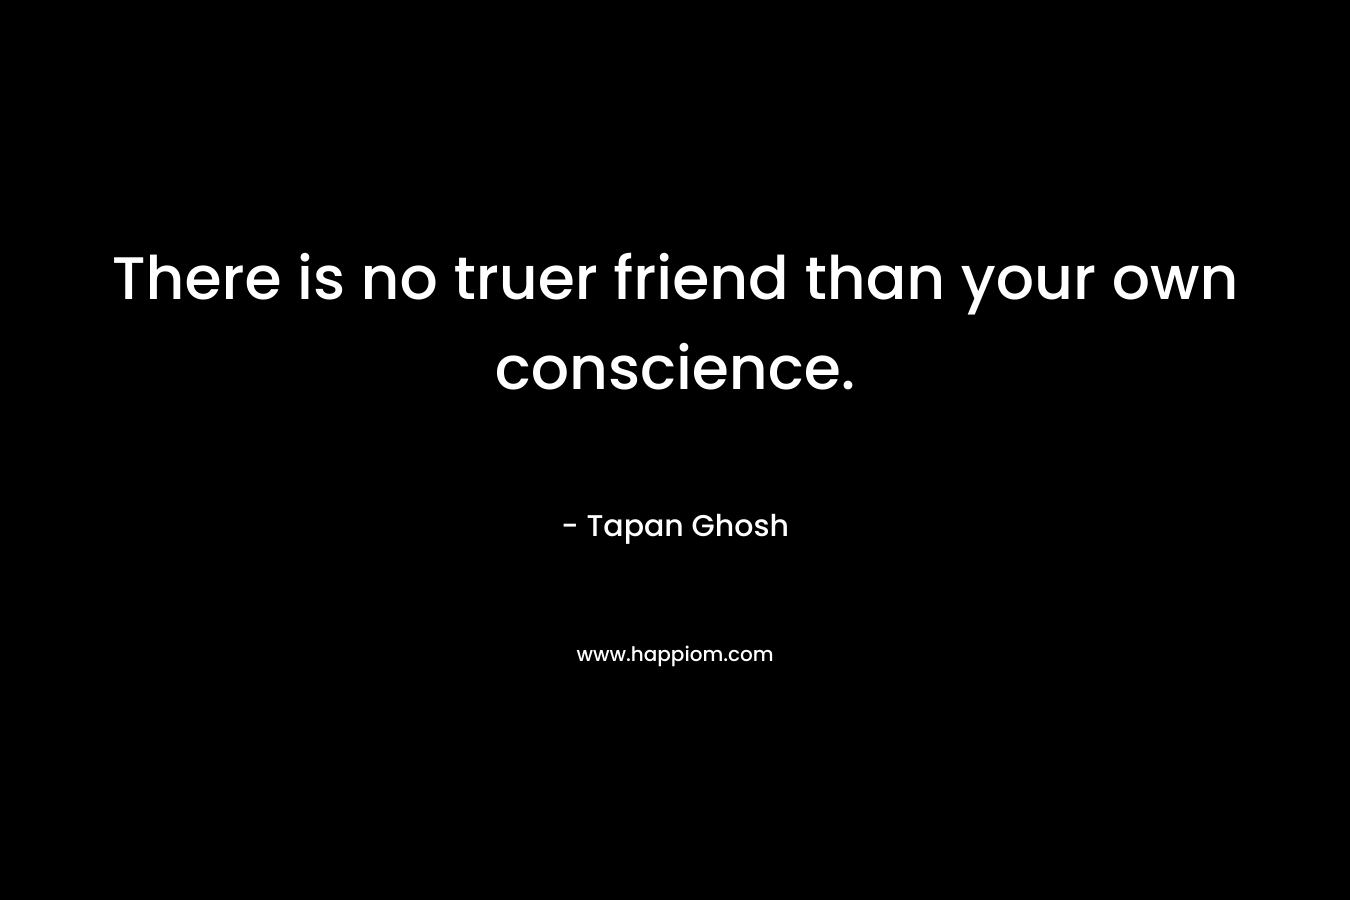 There is no truer friend than your own conscience.